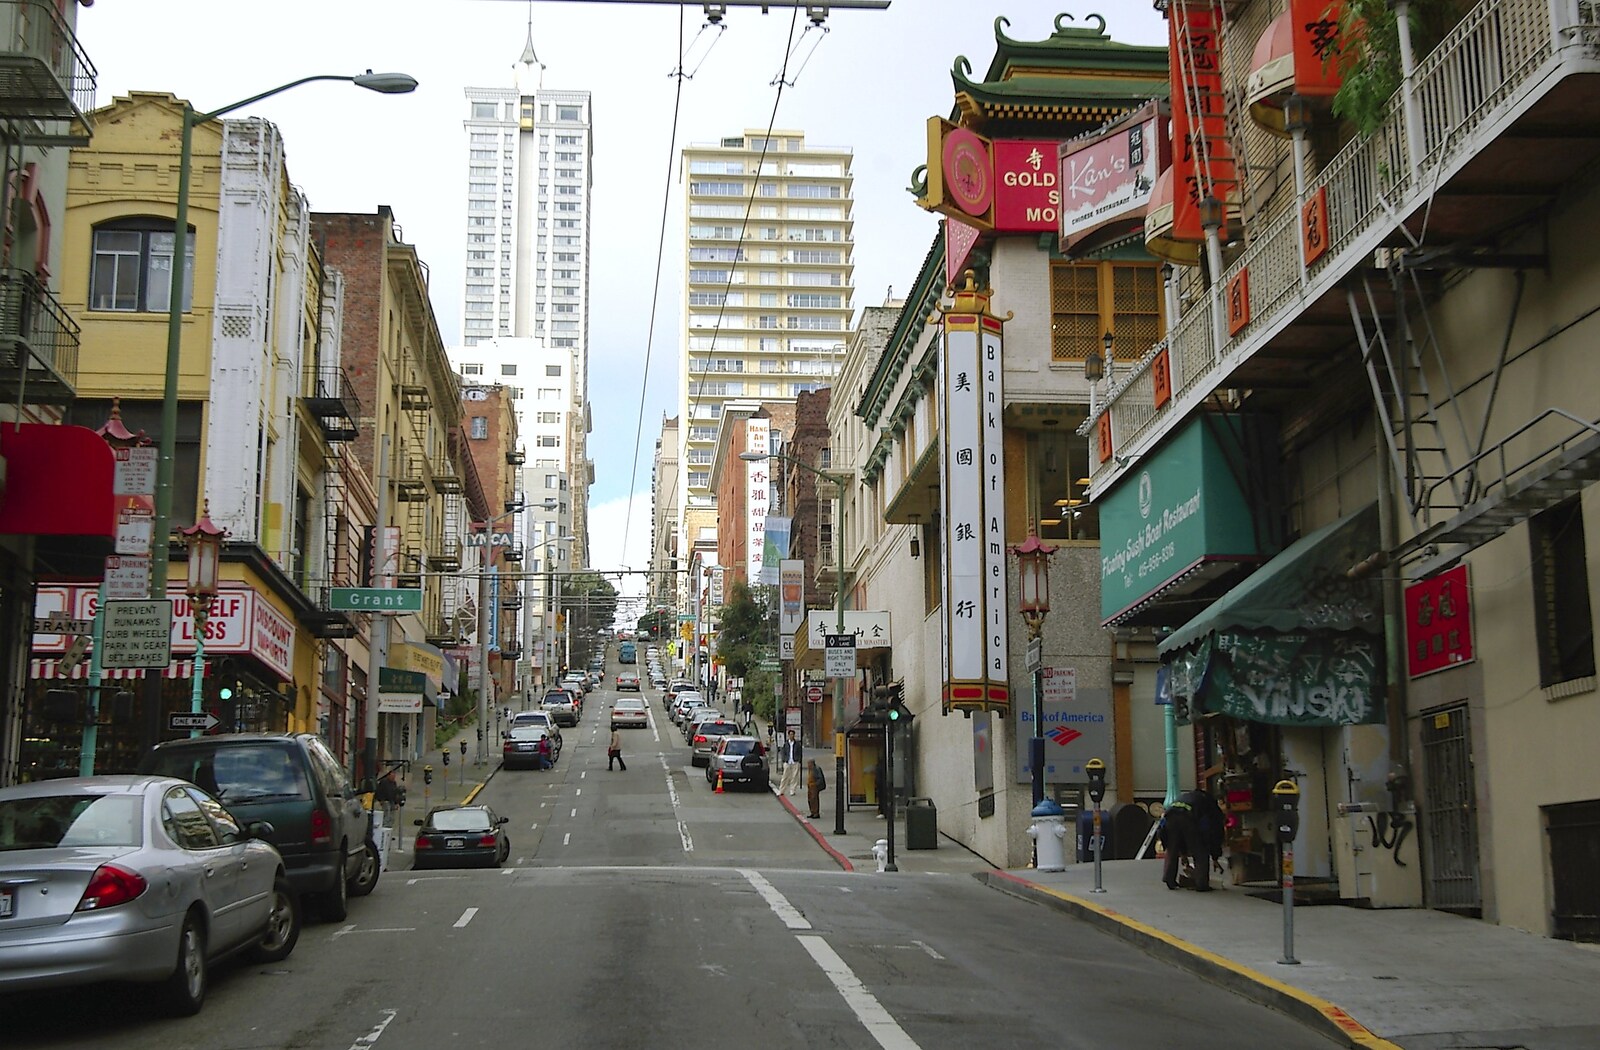 Further along on Grant Street from Chinatown, Telegraph Hill and Fisherman's Wharf, San Francisco, California, US - 11th March 2006